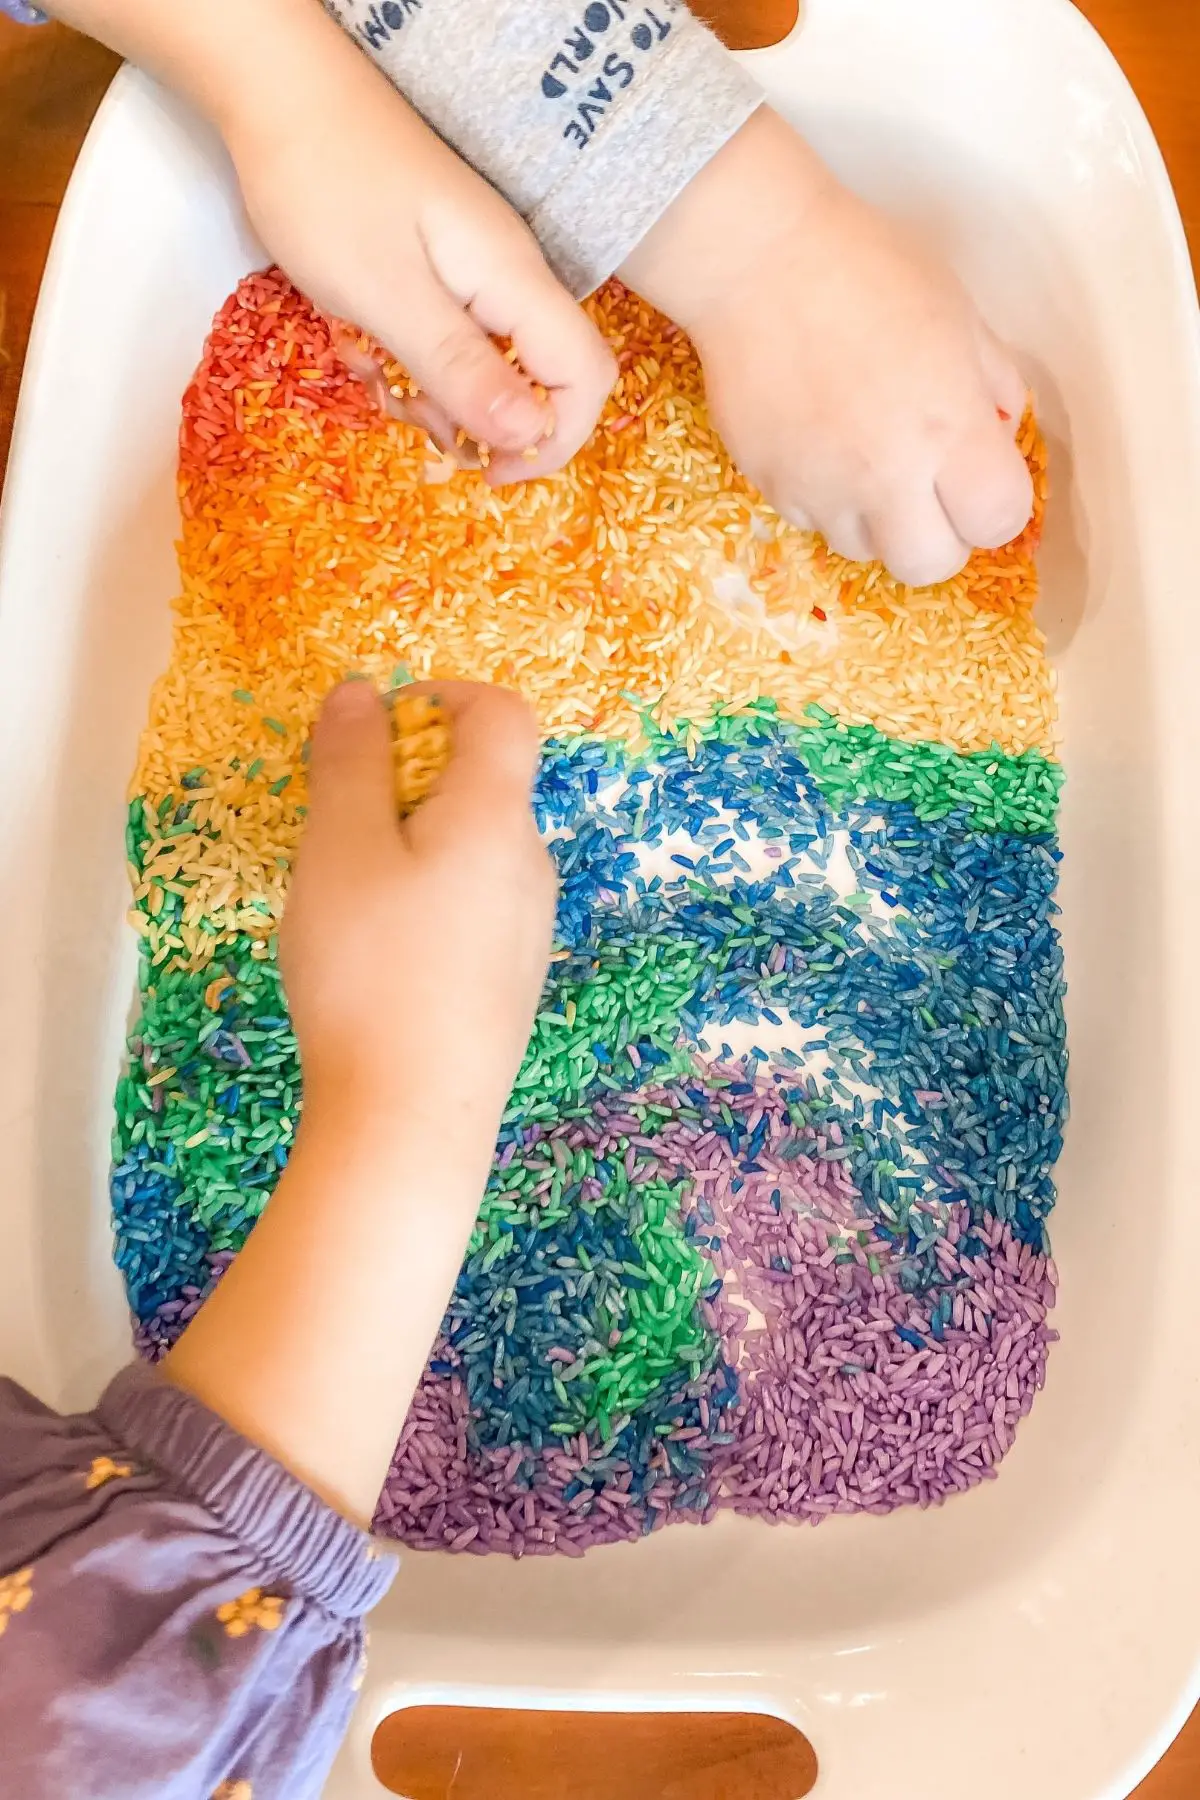 The Best Colored Rice with Food Coloring